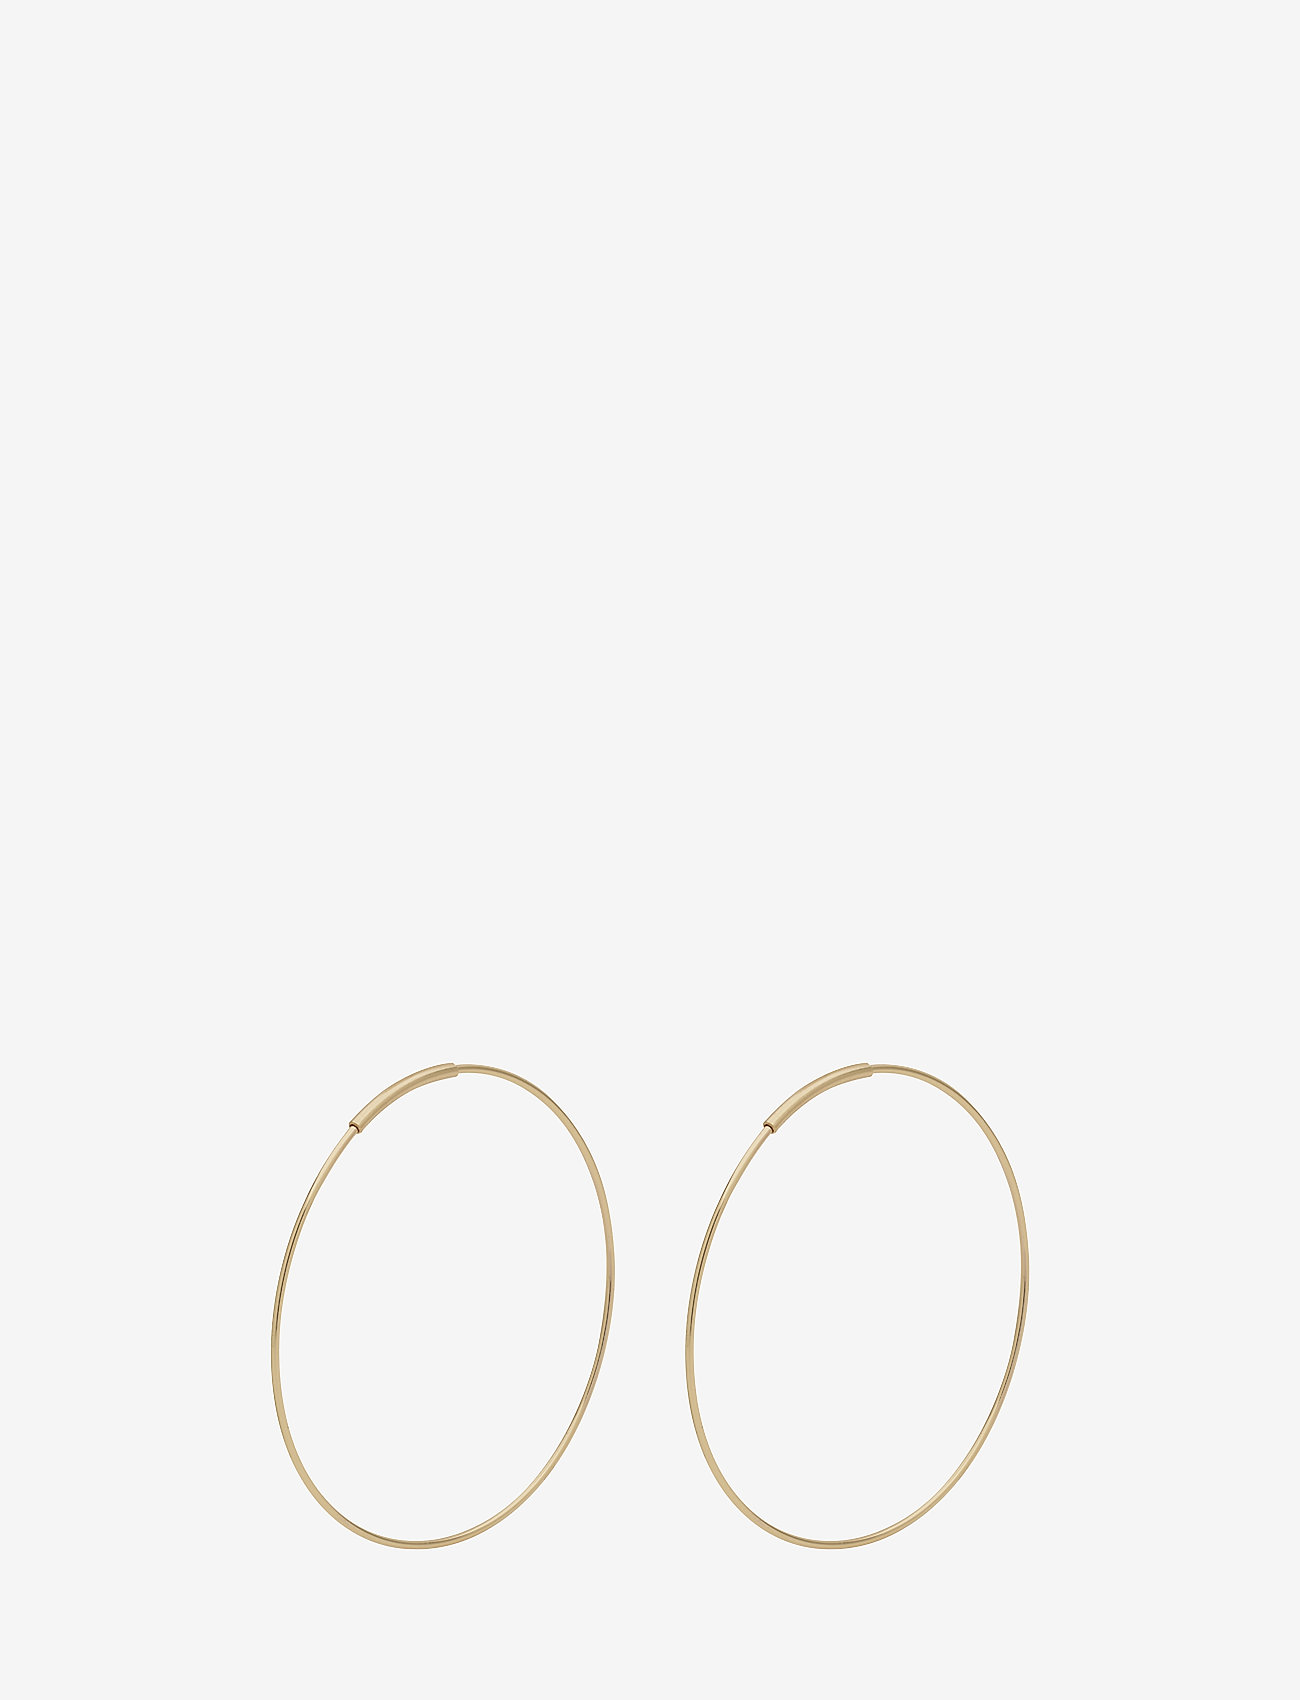 Pilgrim - RAQUEL x-large recycled hoop earrings - hopen - gold plated - 0